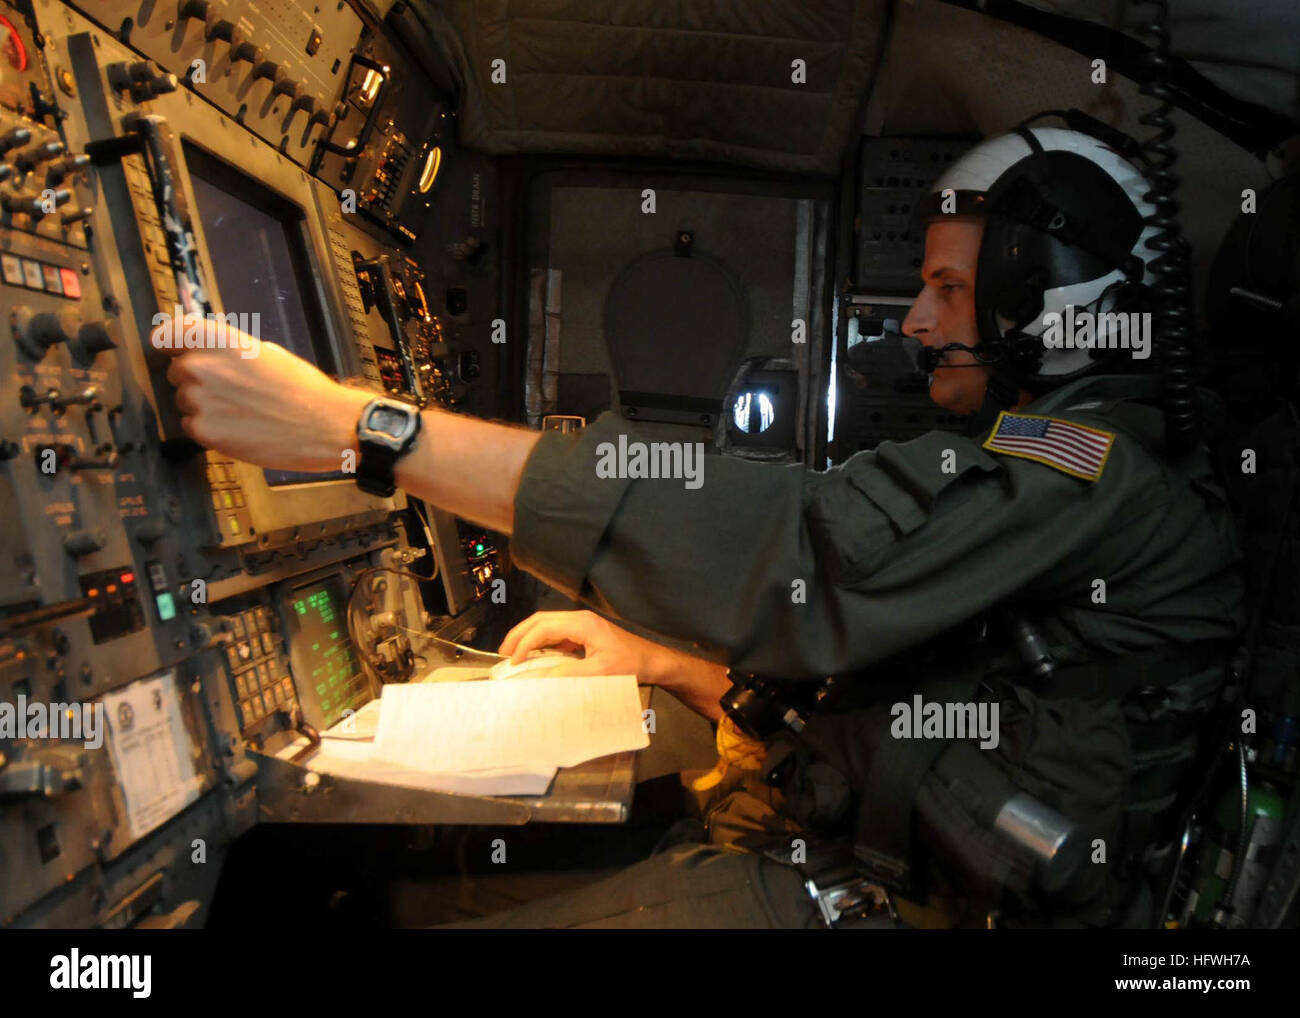 081111-N-9565D-010  PACIFIC OCEAN (Nov. 11, 2008) Lt. Brett Whorley, from Airborne Early Warning Squadron (VAW) 115, the 'Liberty Bells', assess possible targets on his radar while conducting airborne early warning and strike group coordination between various Carrier Air Wing (CVW) 5 squadrons assigned to the aircraft carrier USS George Washington (CVN 73). (U.S. Navy photo by Mass Communication Specialist 2nd Class Clifford L. H. Davis/Released) US Navy 081111-N-9565D-010 Lt. Brett Whorley, from Airborne Early Warning Squadron (VAW) 115, the Stock Photo